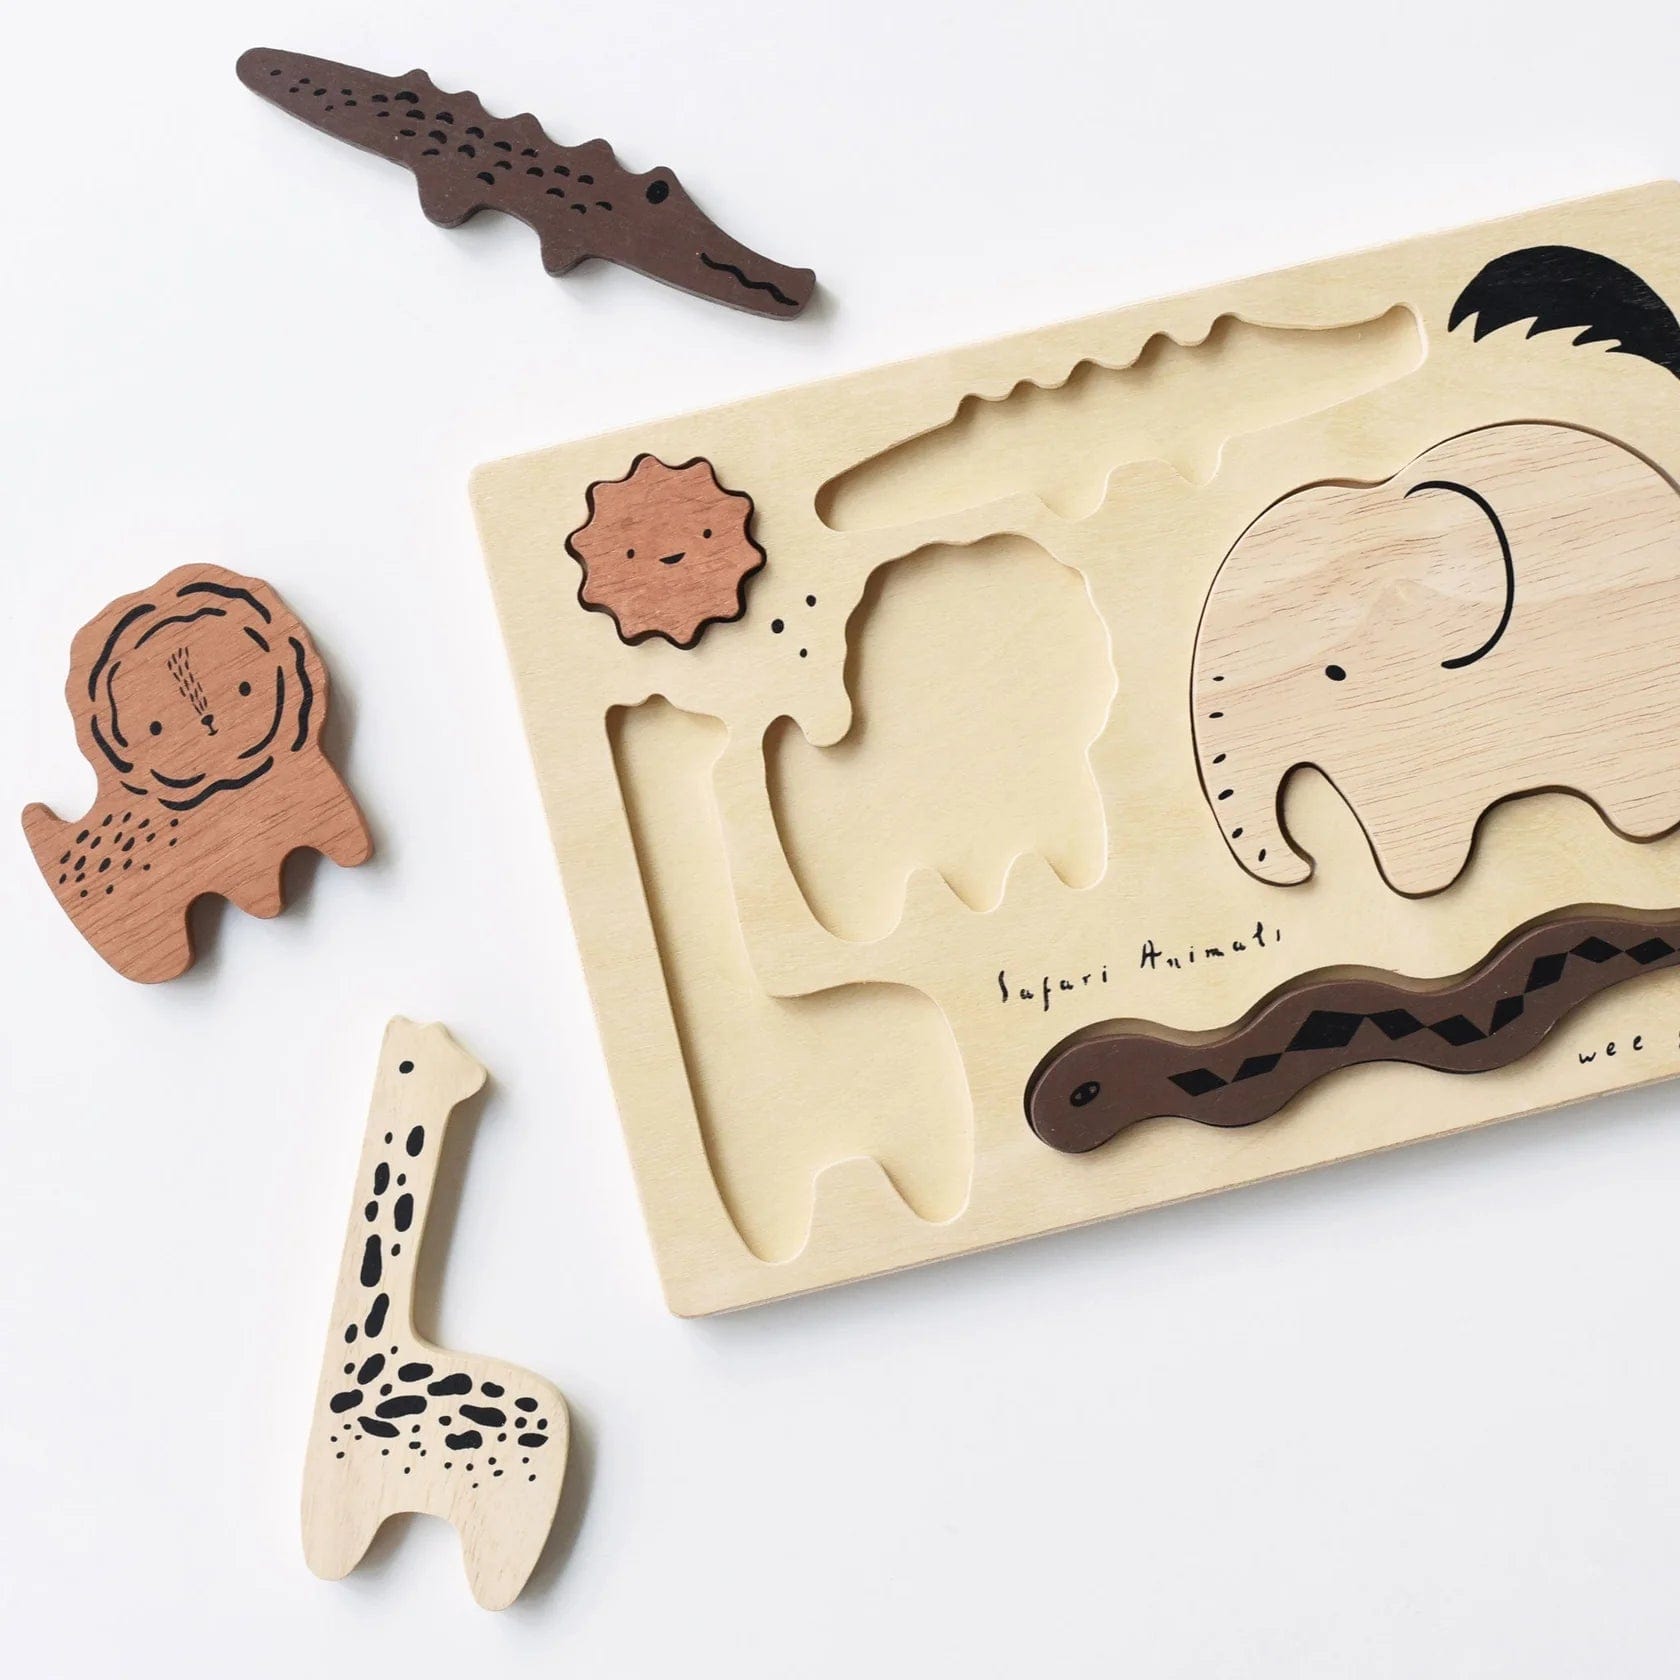 Wee Gallery Accessory Wooden Tray Puzzle - Safari Animals Wee Gallery Wooden Tray Puzzle - Safari Animals